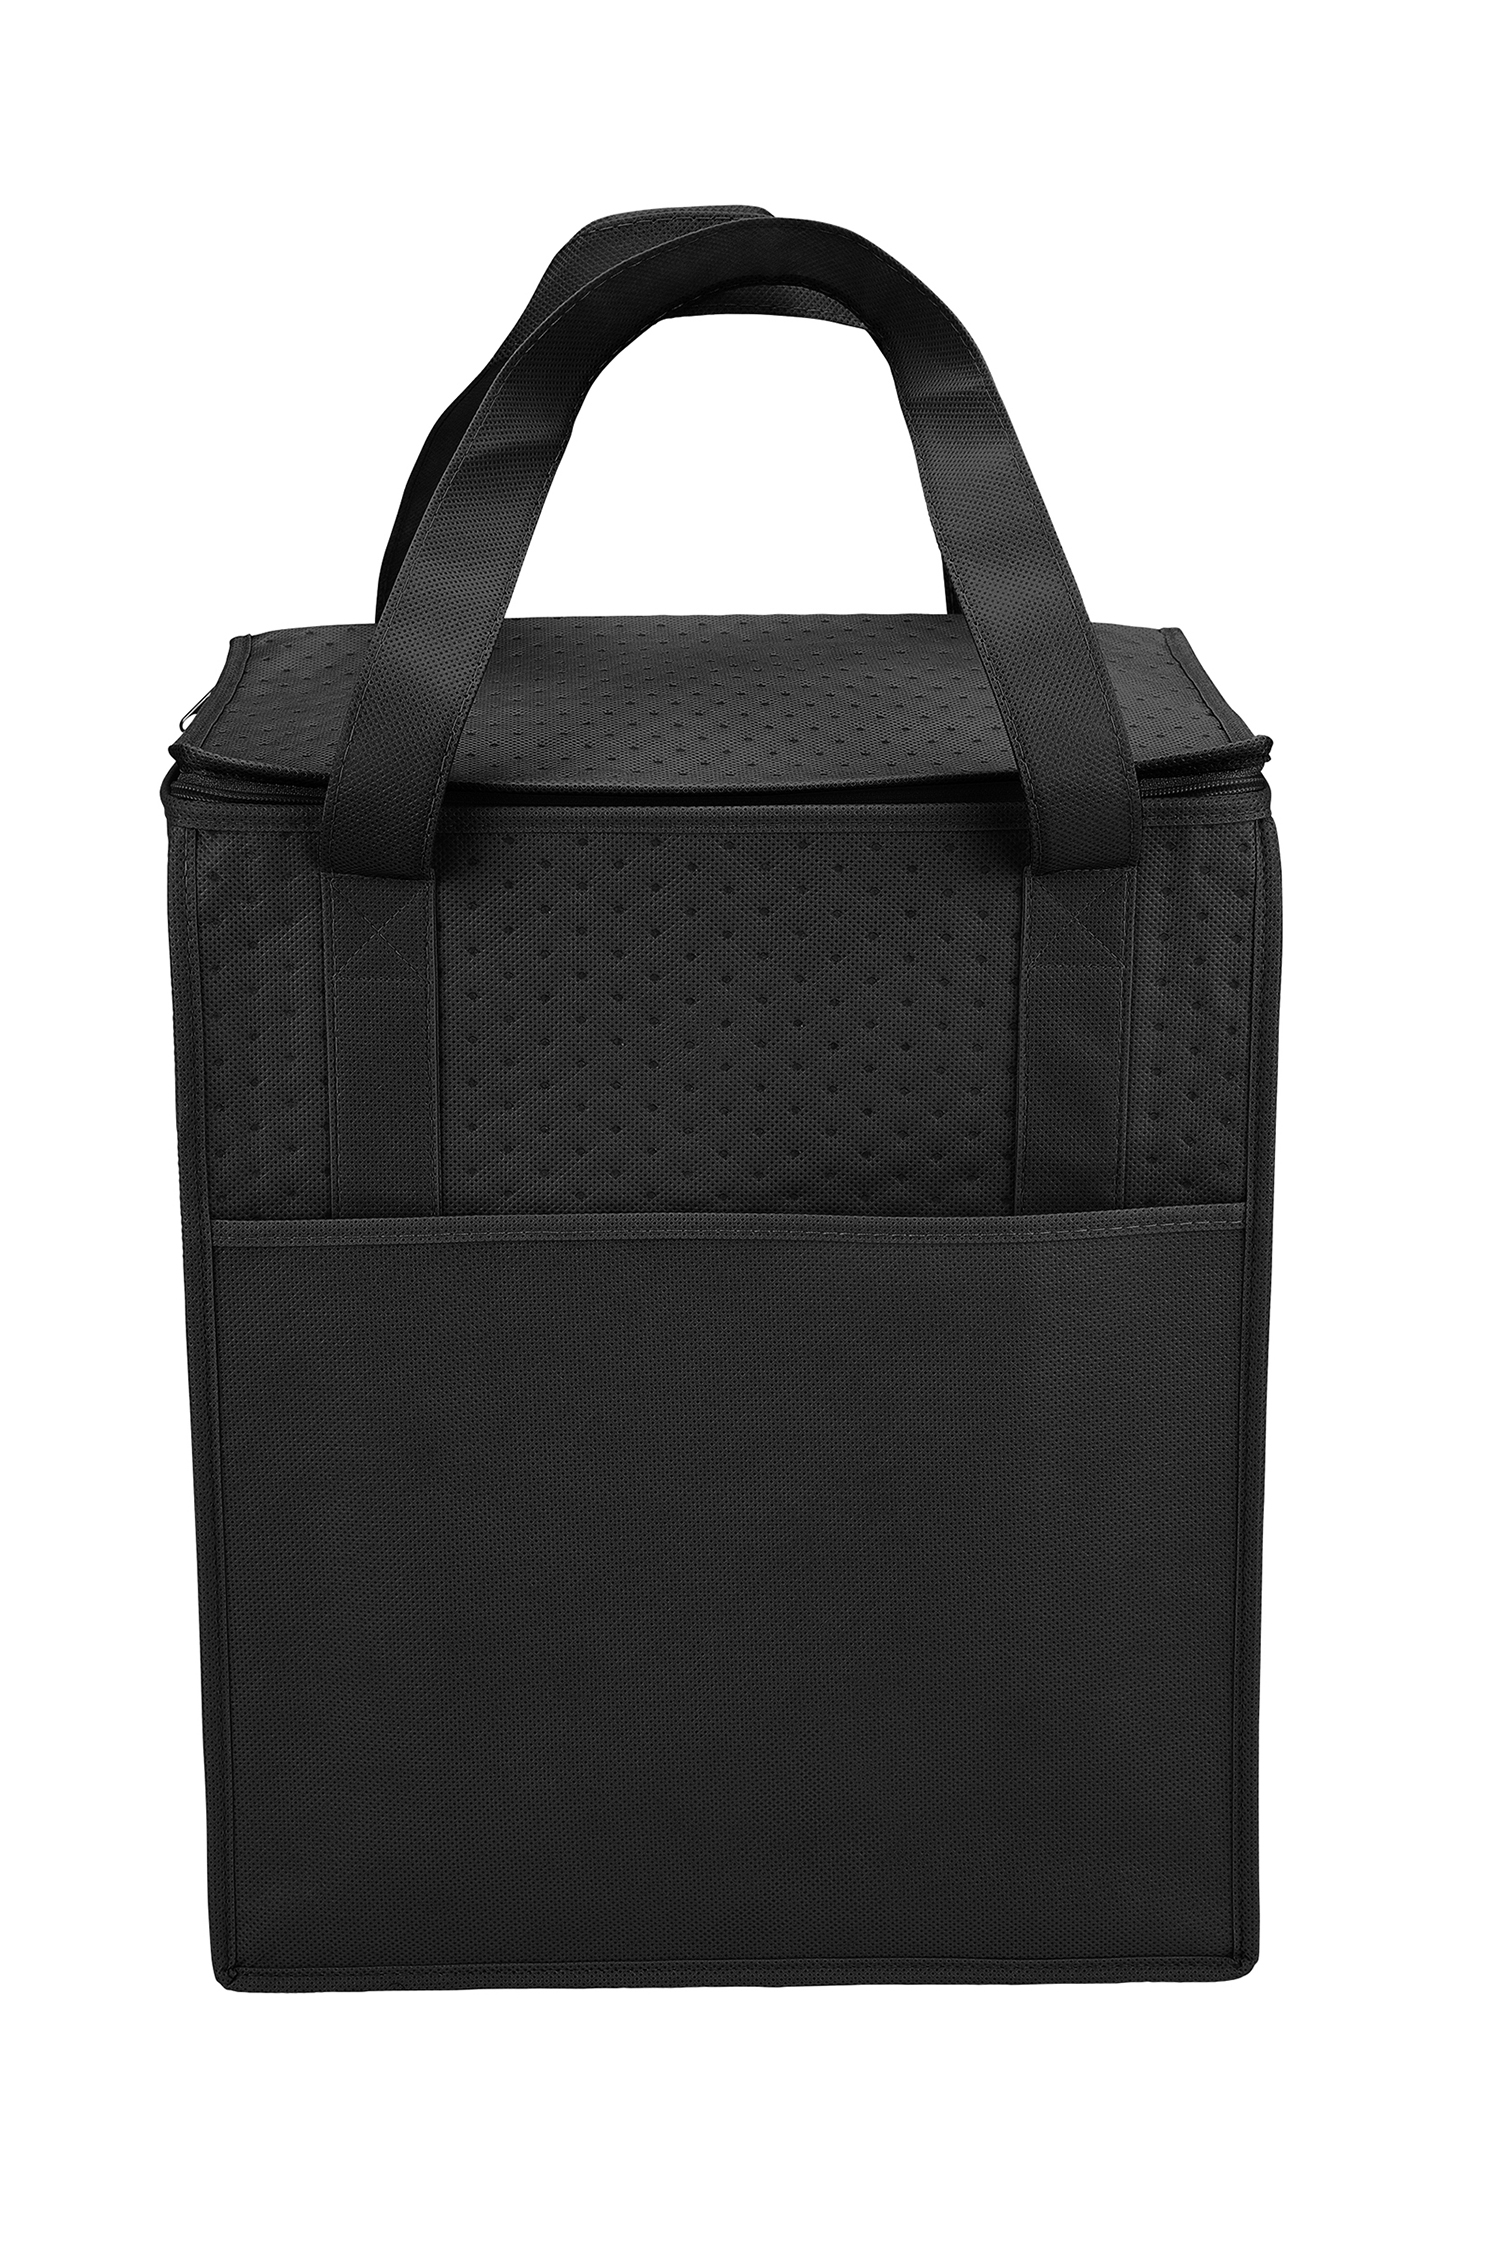 Bag Makers SPACS1315 - Custom Printed Eco-Friendly Insulated Promotional Non-Woven Tote Bag